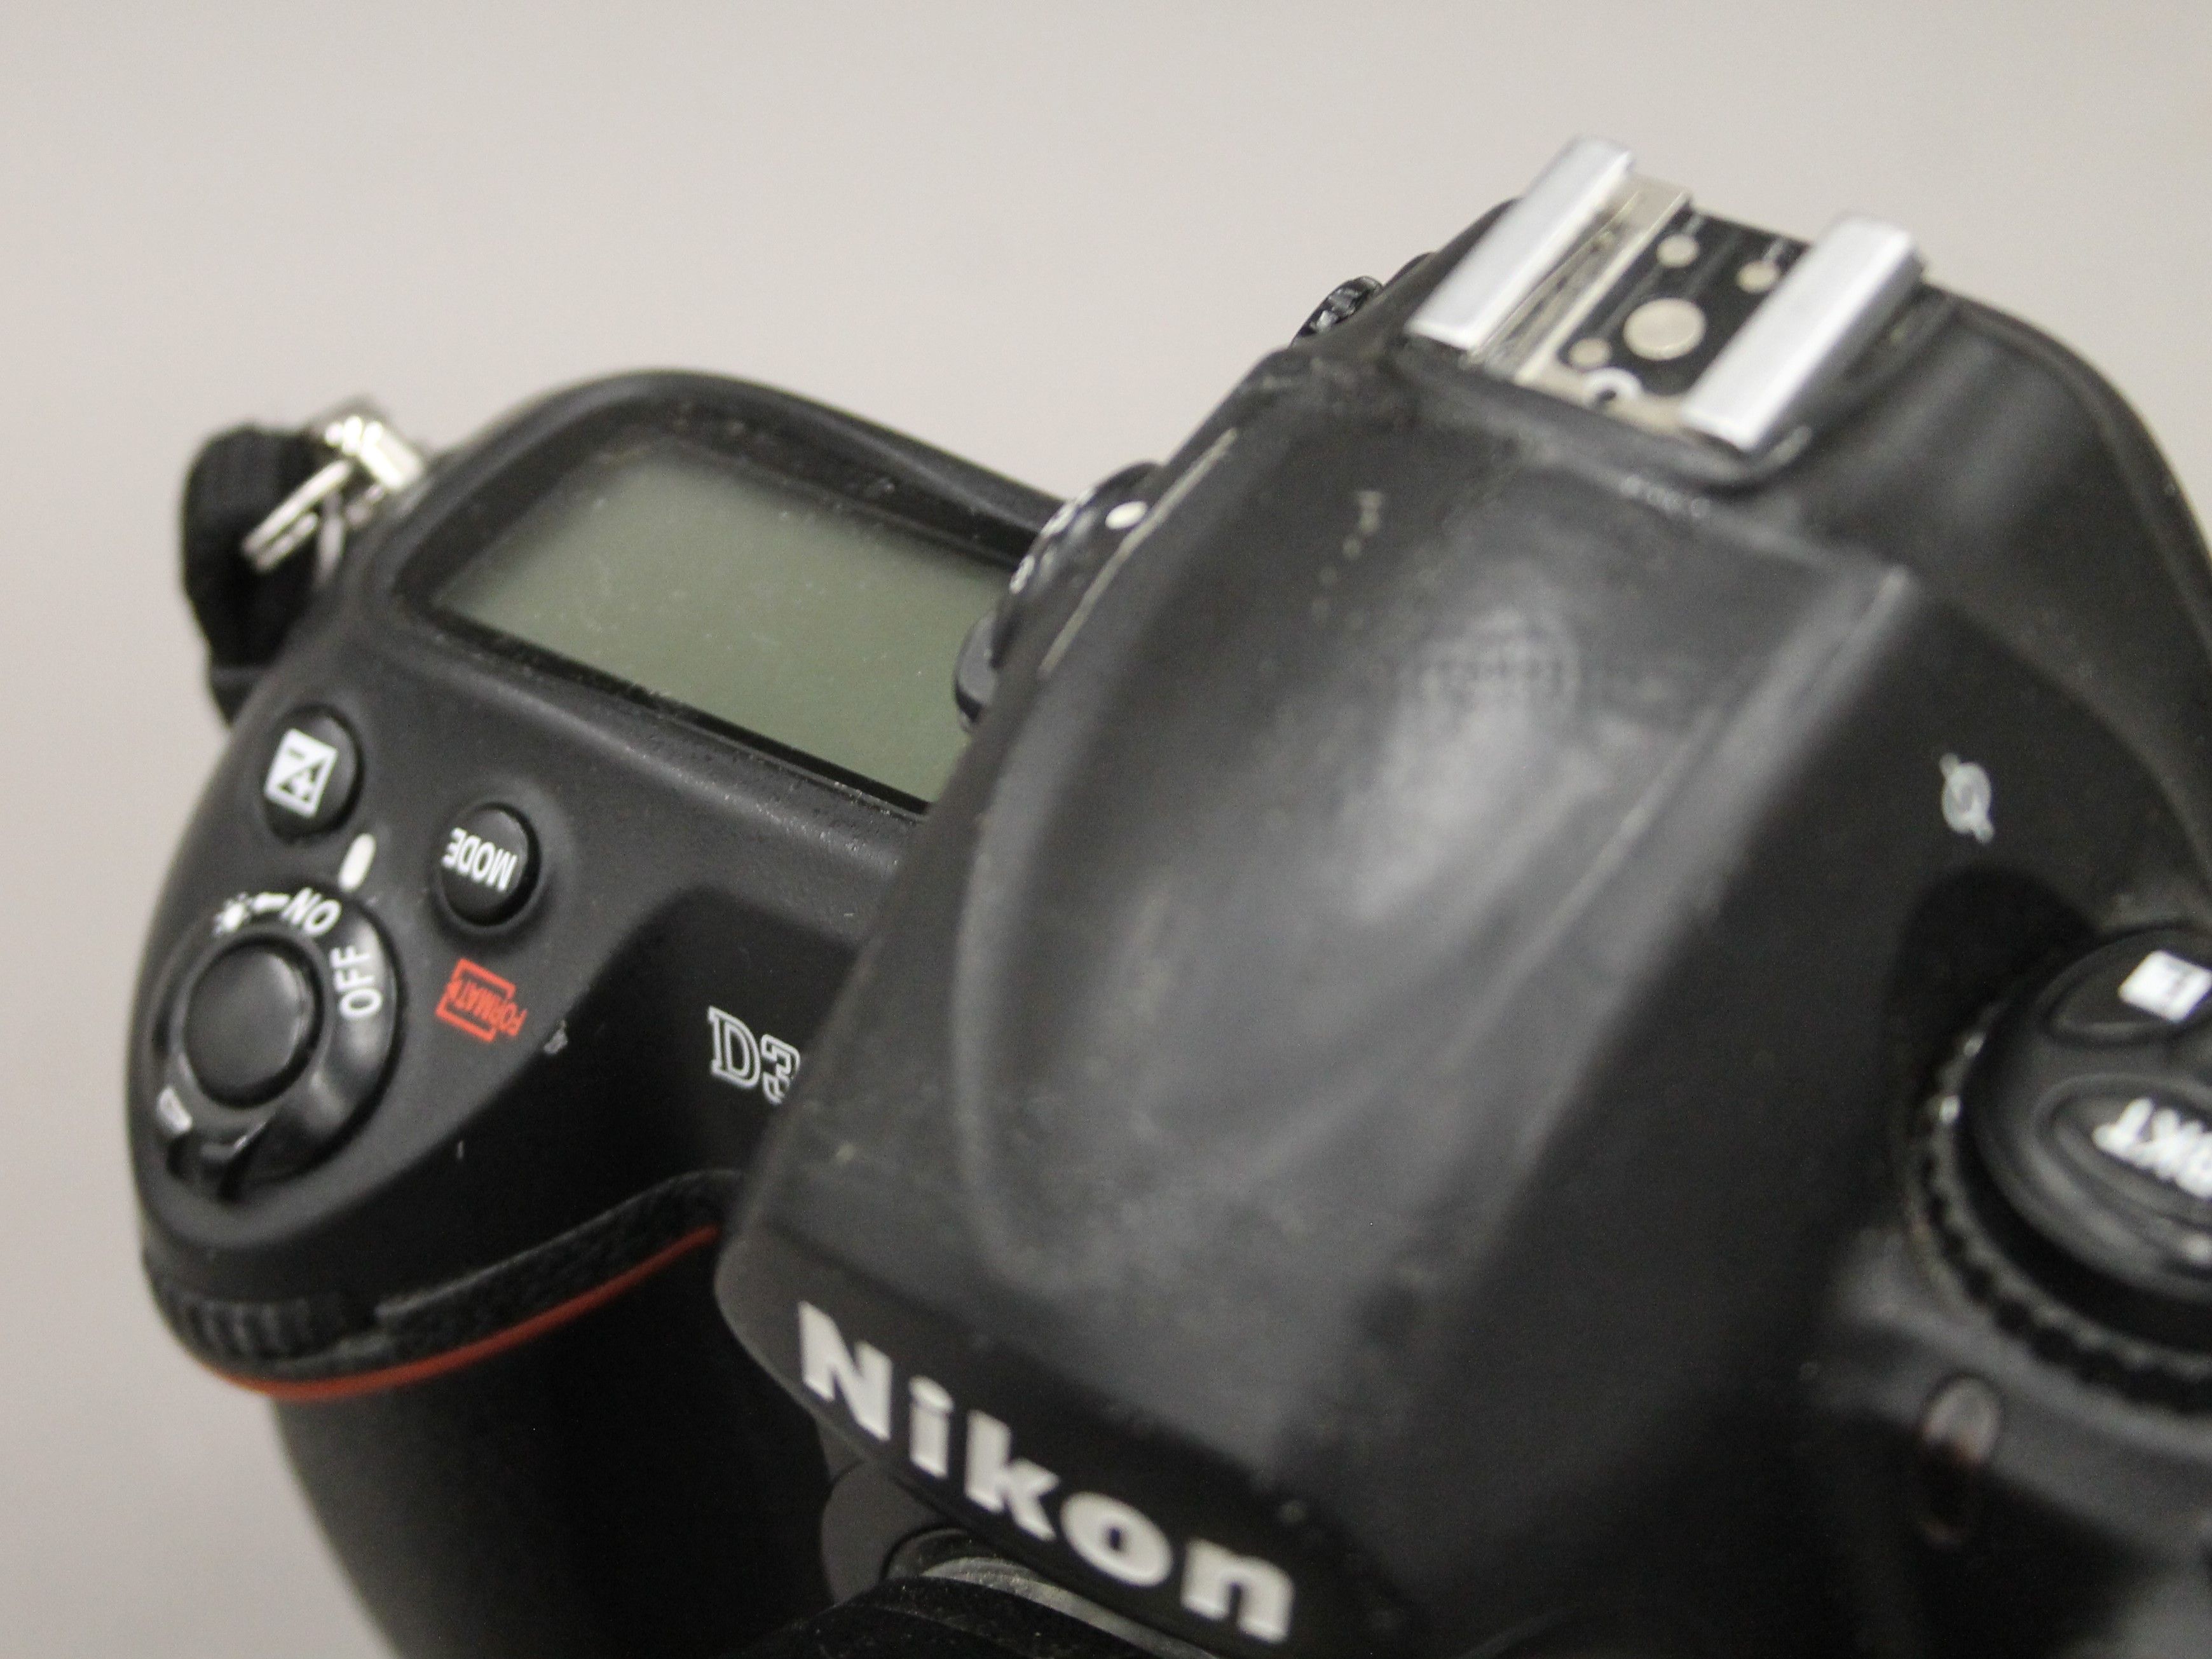 A quantity of Nikon camera equipment etc. in a carrying case. The case 46 cm high. - Image 4 of 14